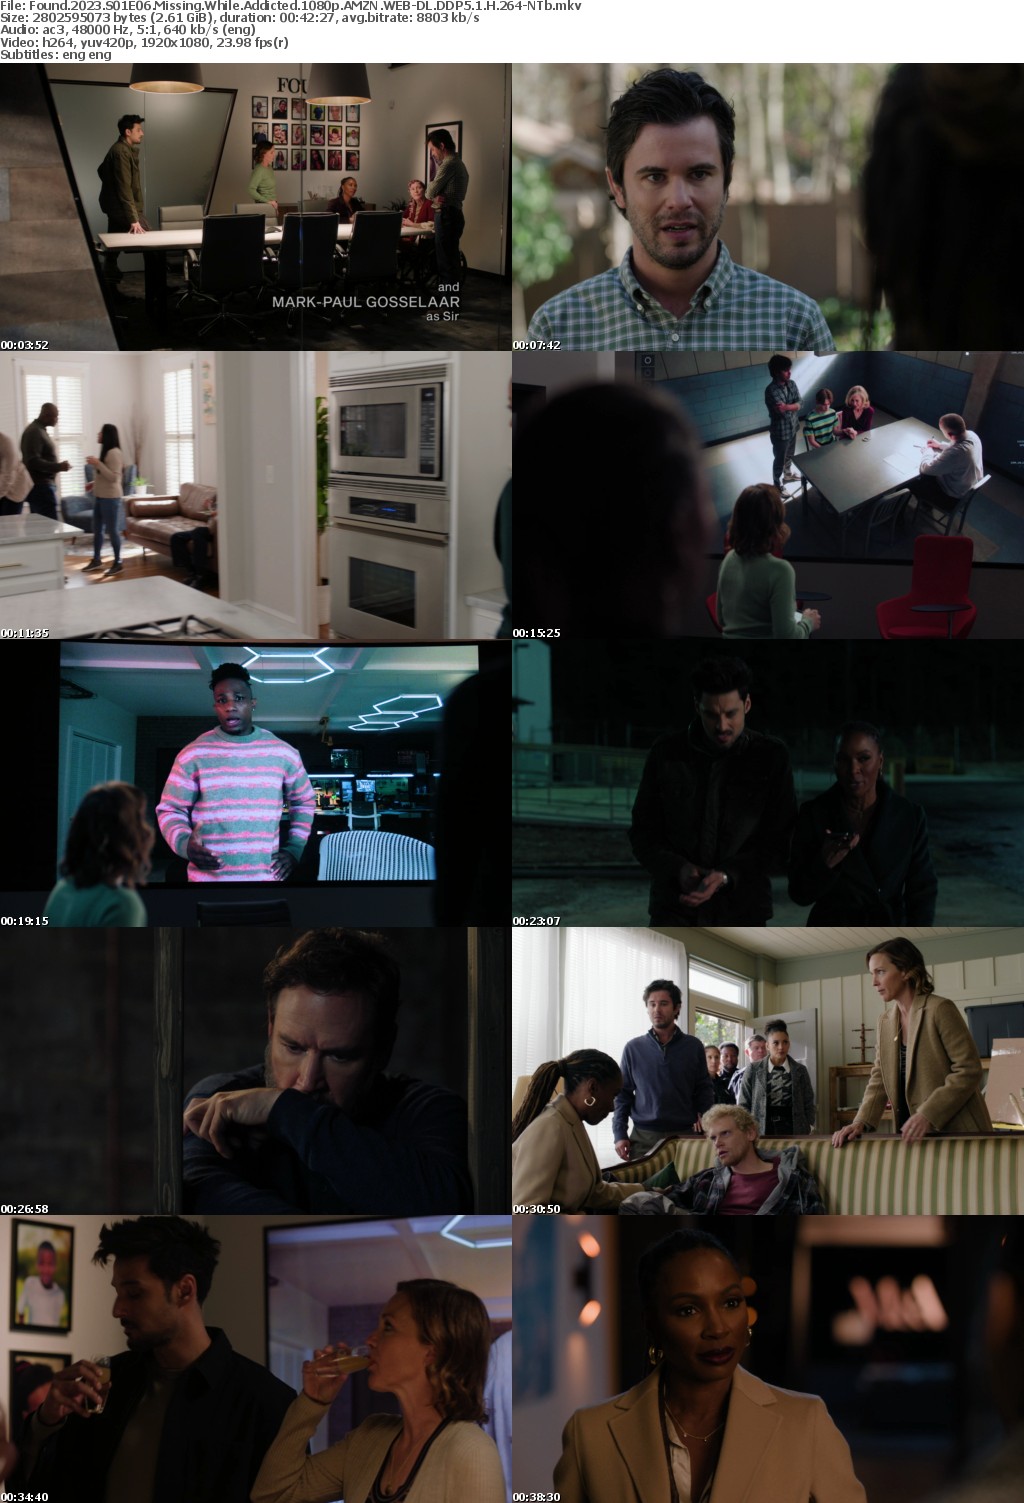 Found 2023 S01E06 Missing While Addicted 1080p AMZN WEB-DL DDP5 1 H 264-NTb